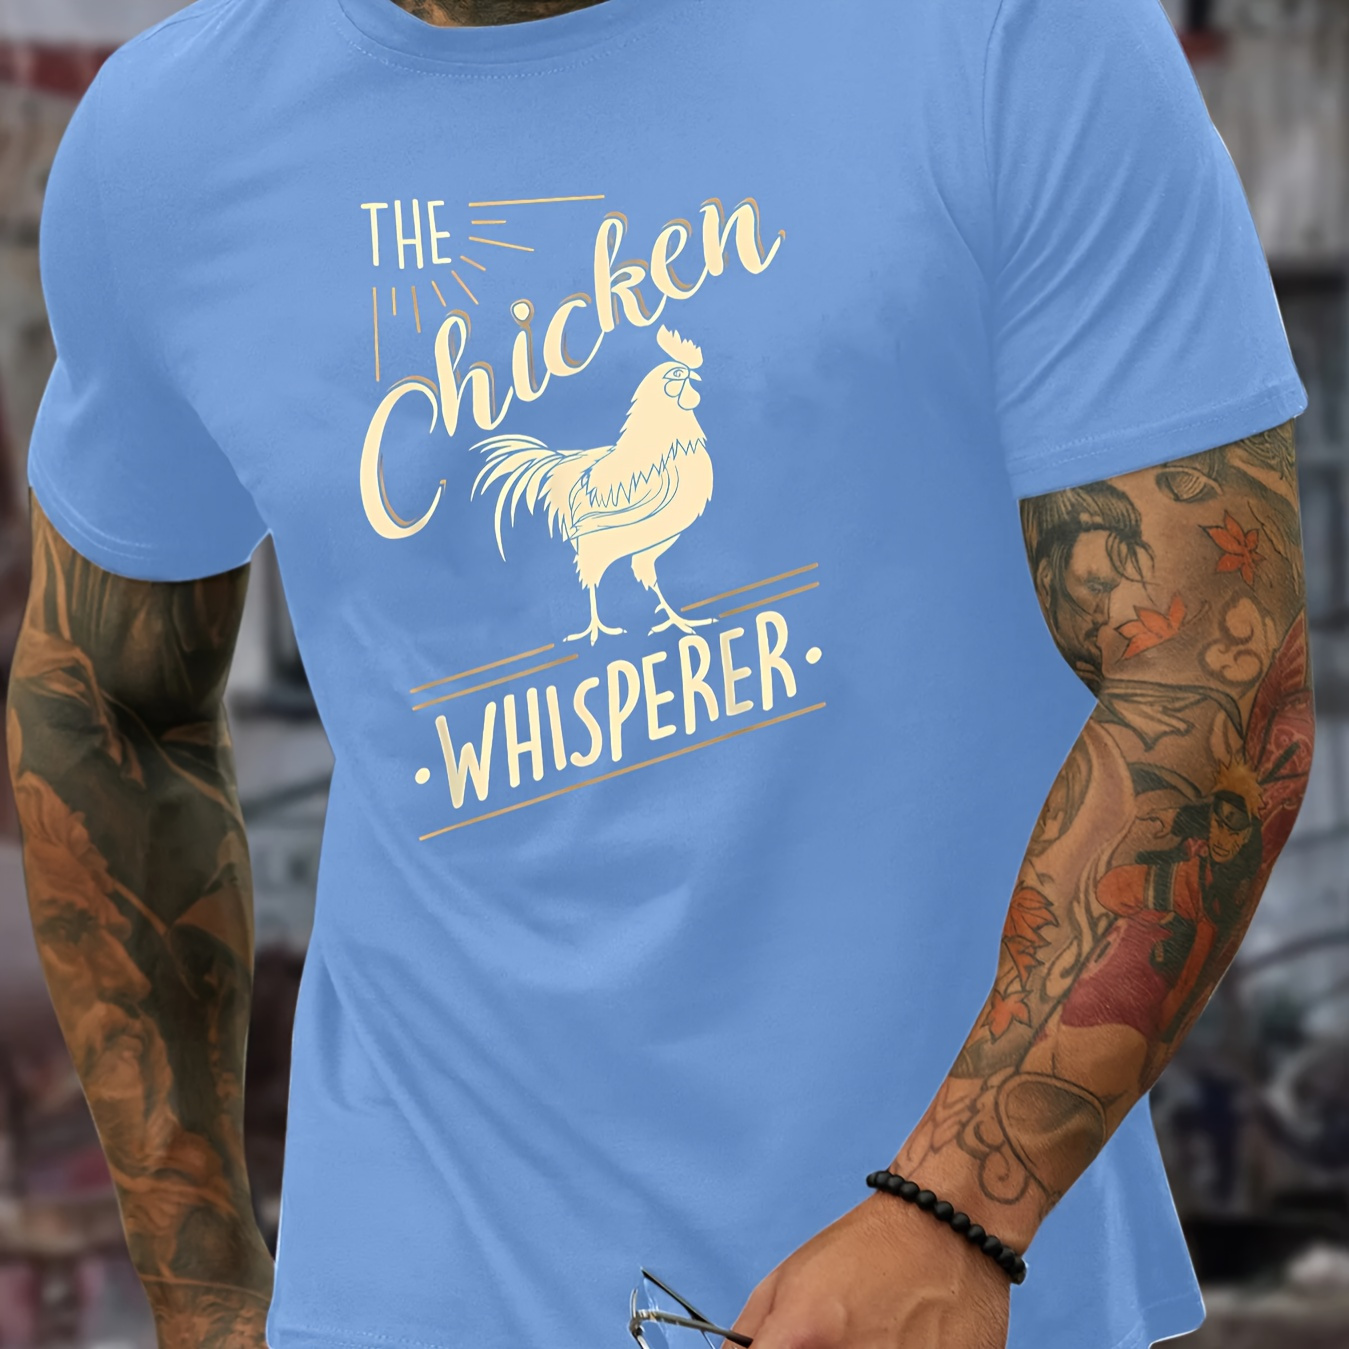 

Graffiti The Chicken Whisperer Graphic Print, Men's Comfy T-shirt, Casual Fit Tees For Summer, Men's Clothing Tops For Daily Activities